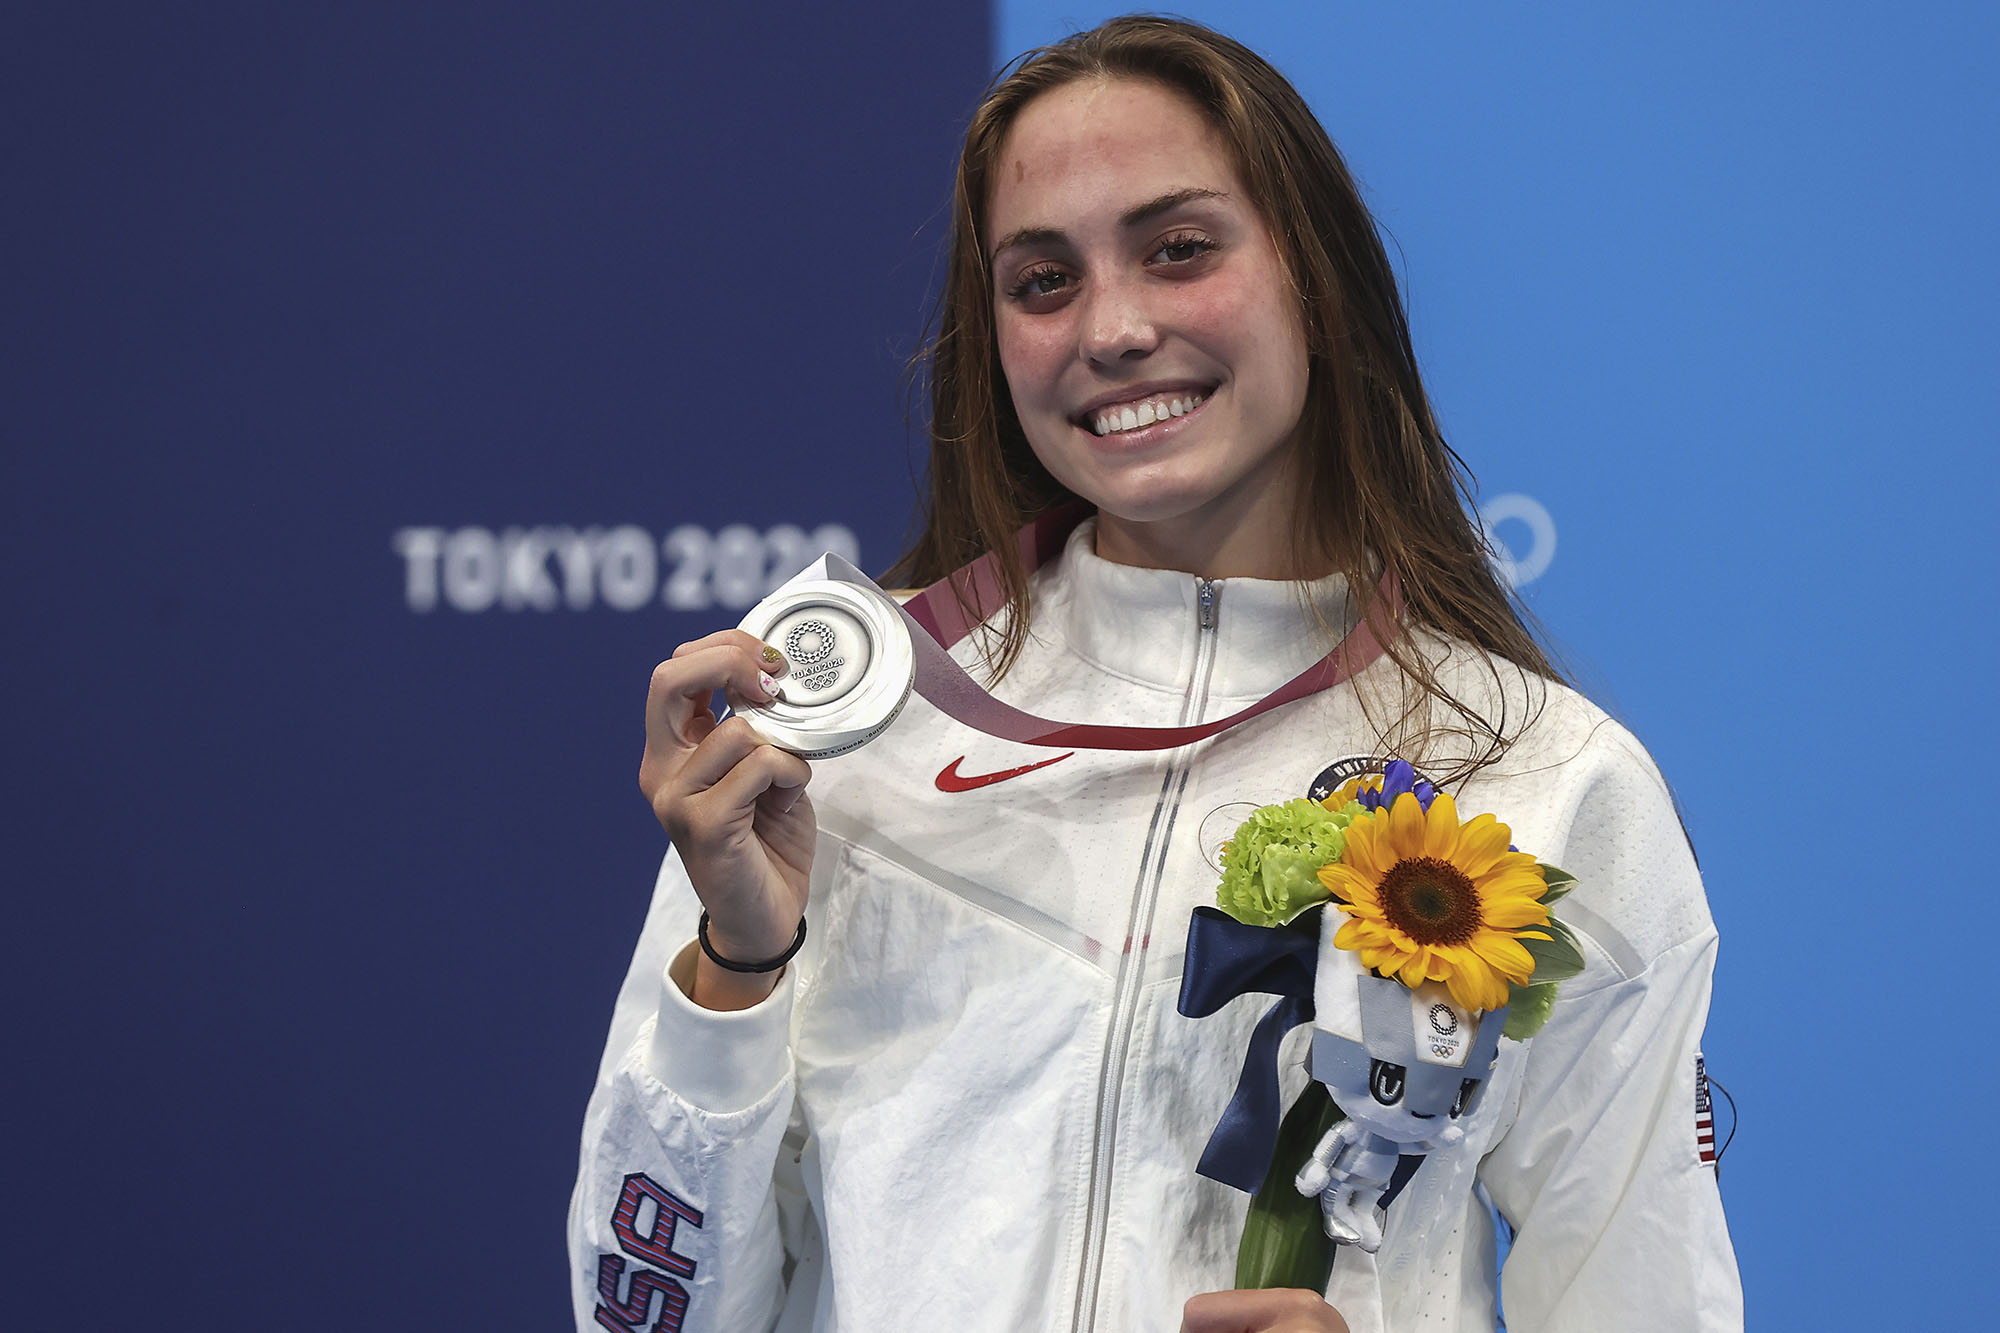 Emma Weyant holds silver medal and flowers and smiles to the camera